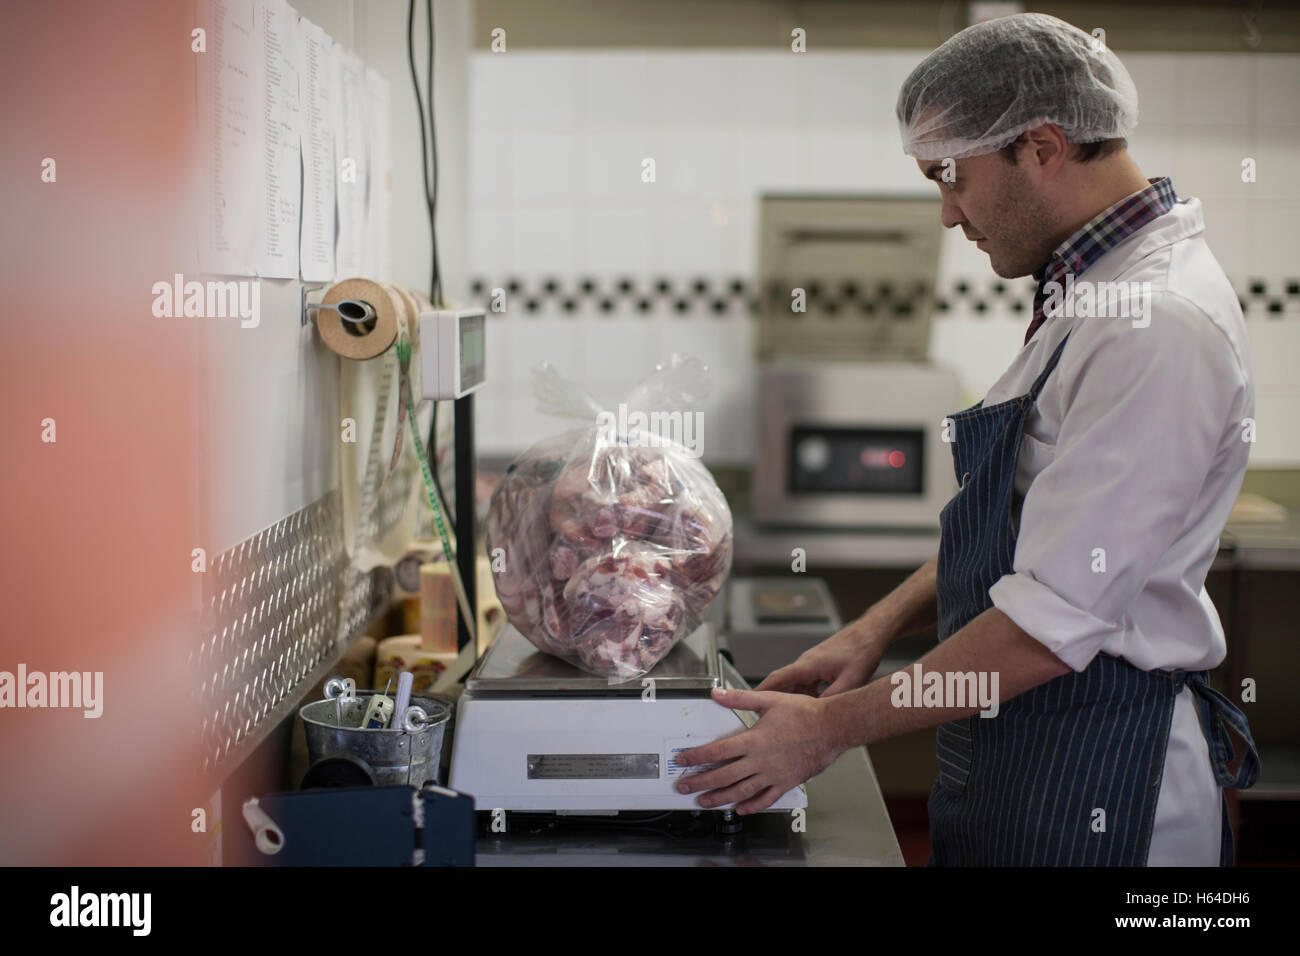 https://c8.alamy.com/comp/H64DH6/butcher-weighing-meat-on-scale-in-butchery-H64DH6.jpg